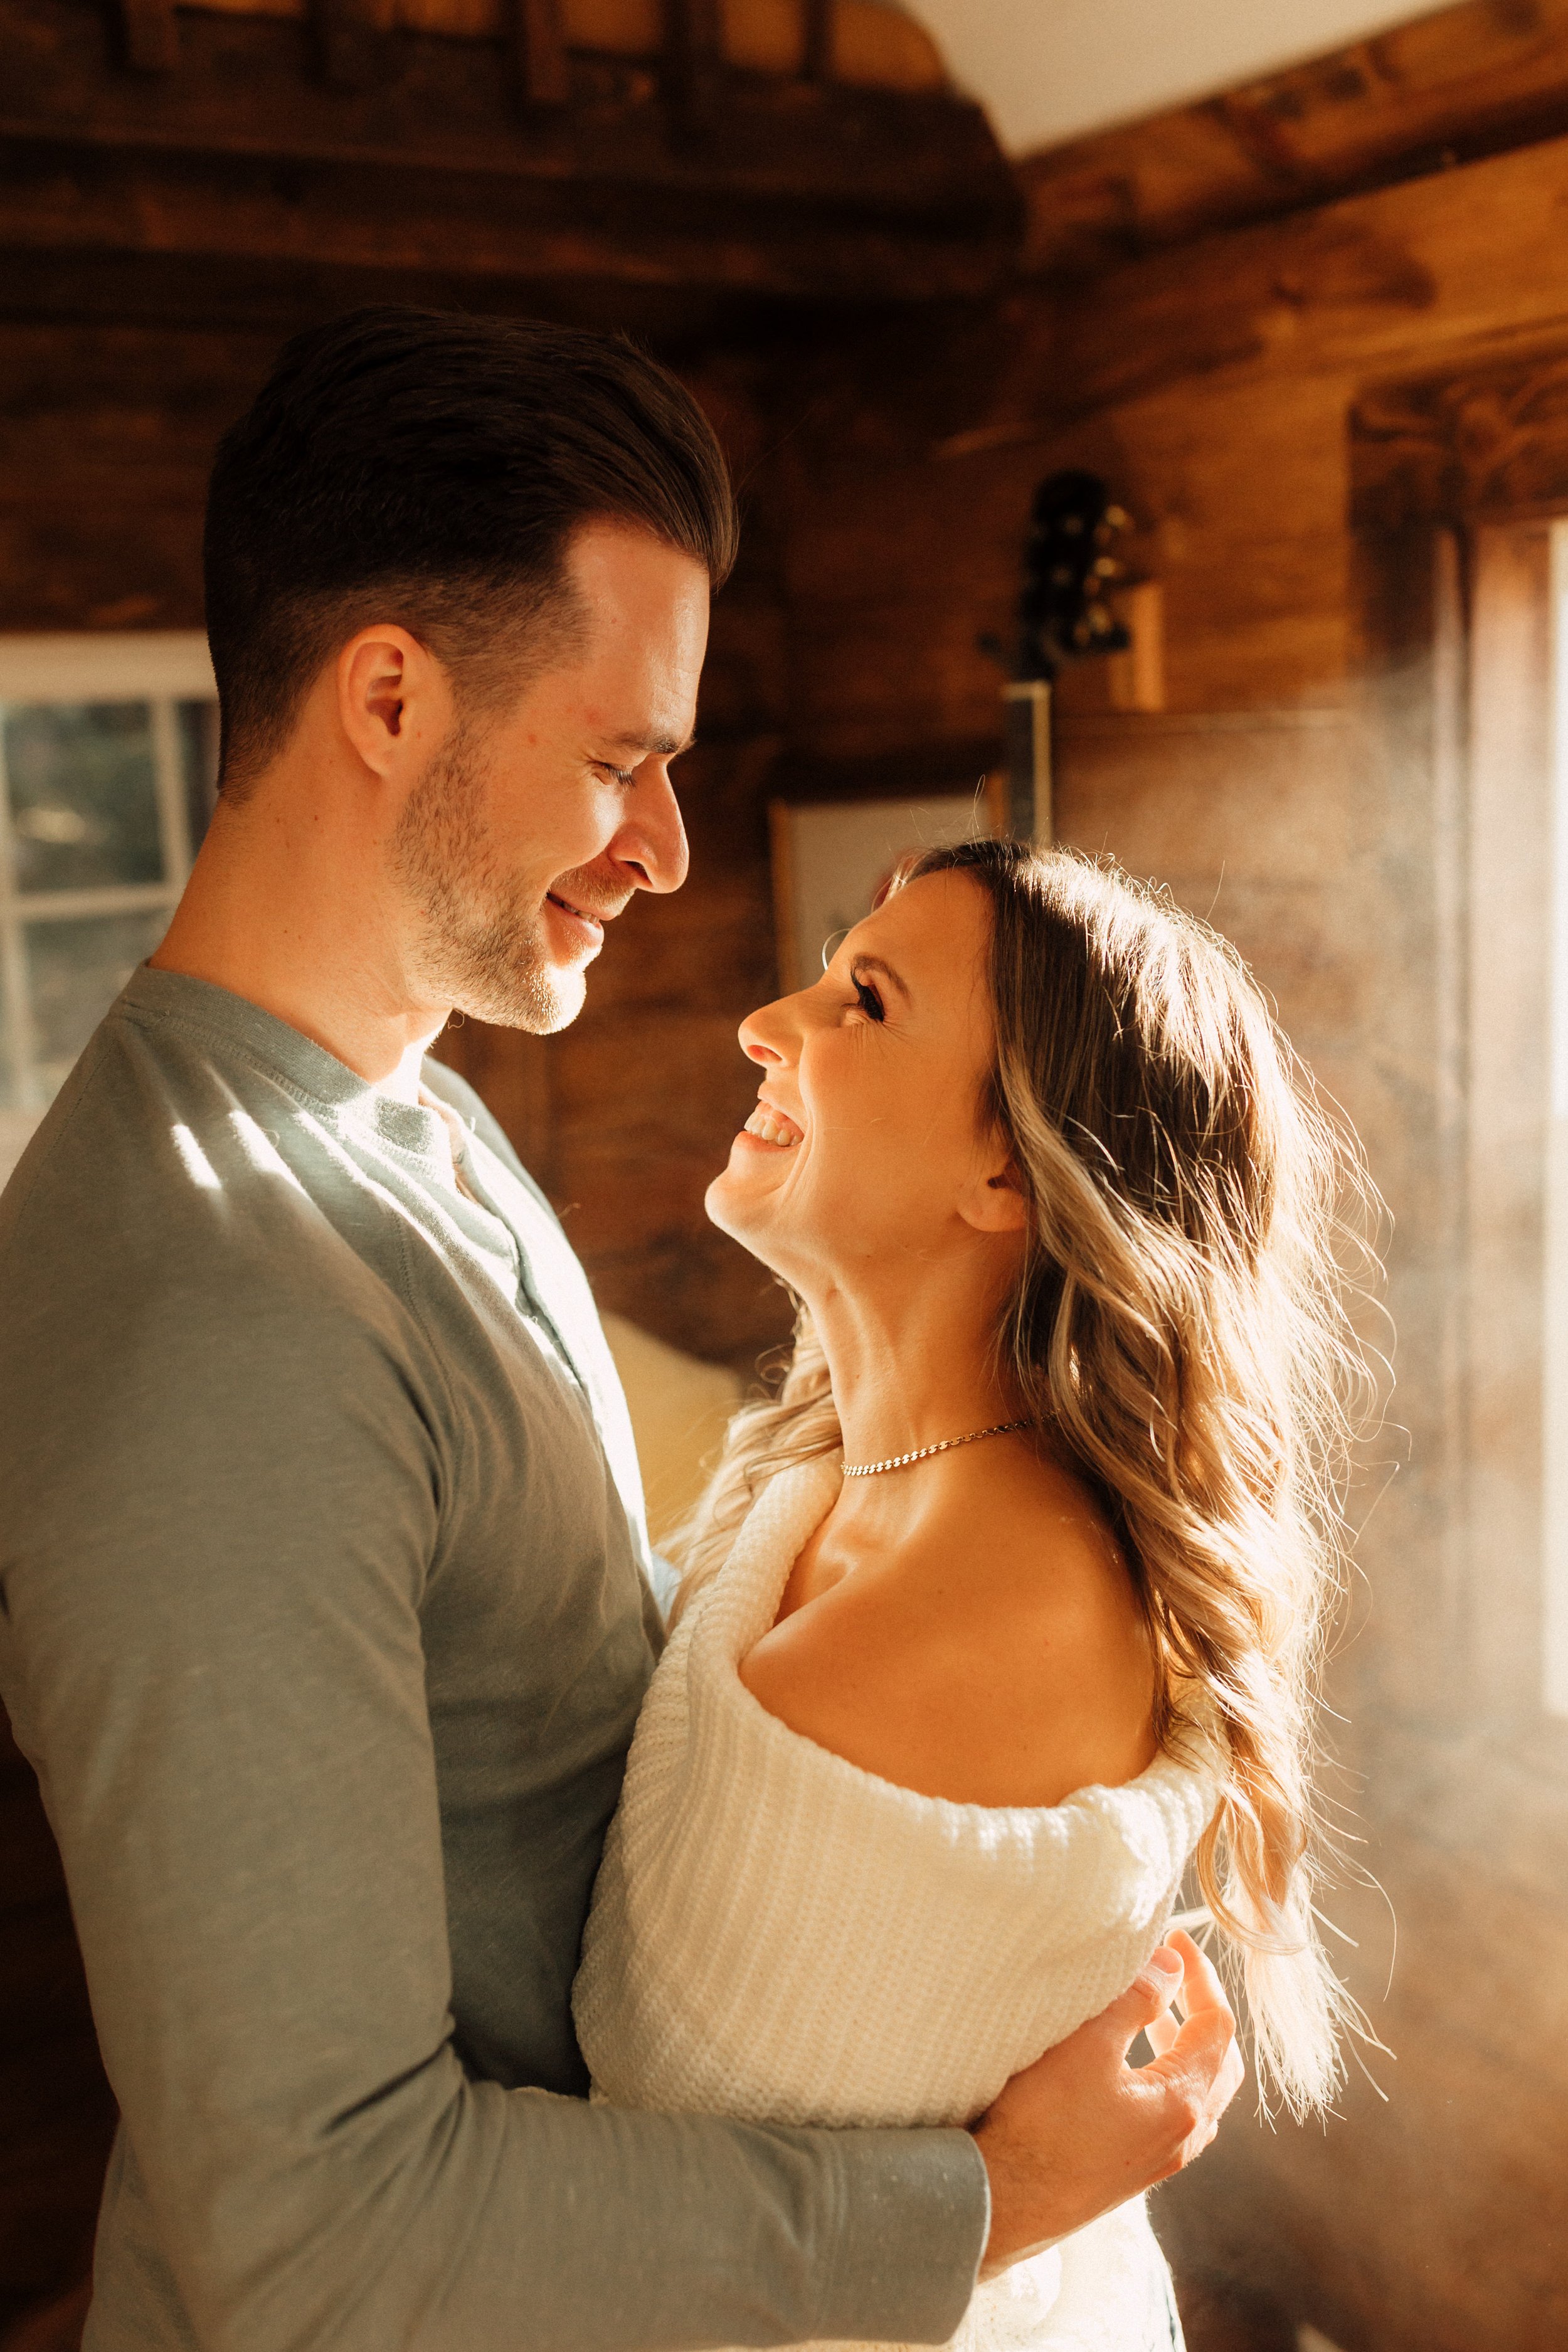 Laura_Ben_Engagment_Session_Winterset_Des_moines_Iowa_Couples_Photographer_Iris_Aisle_Cabin_Conservatory_Candid_Snow_Day_Winter_KMP_Photography-9827.jpg